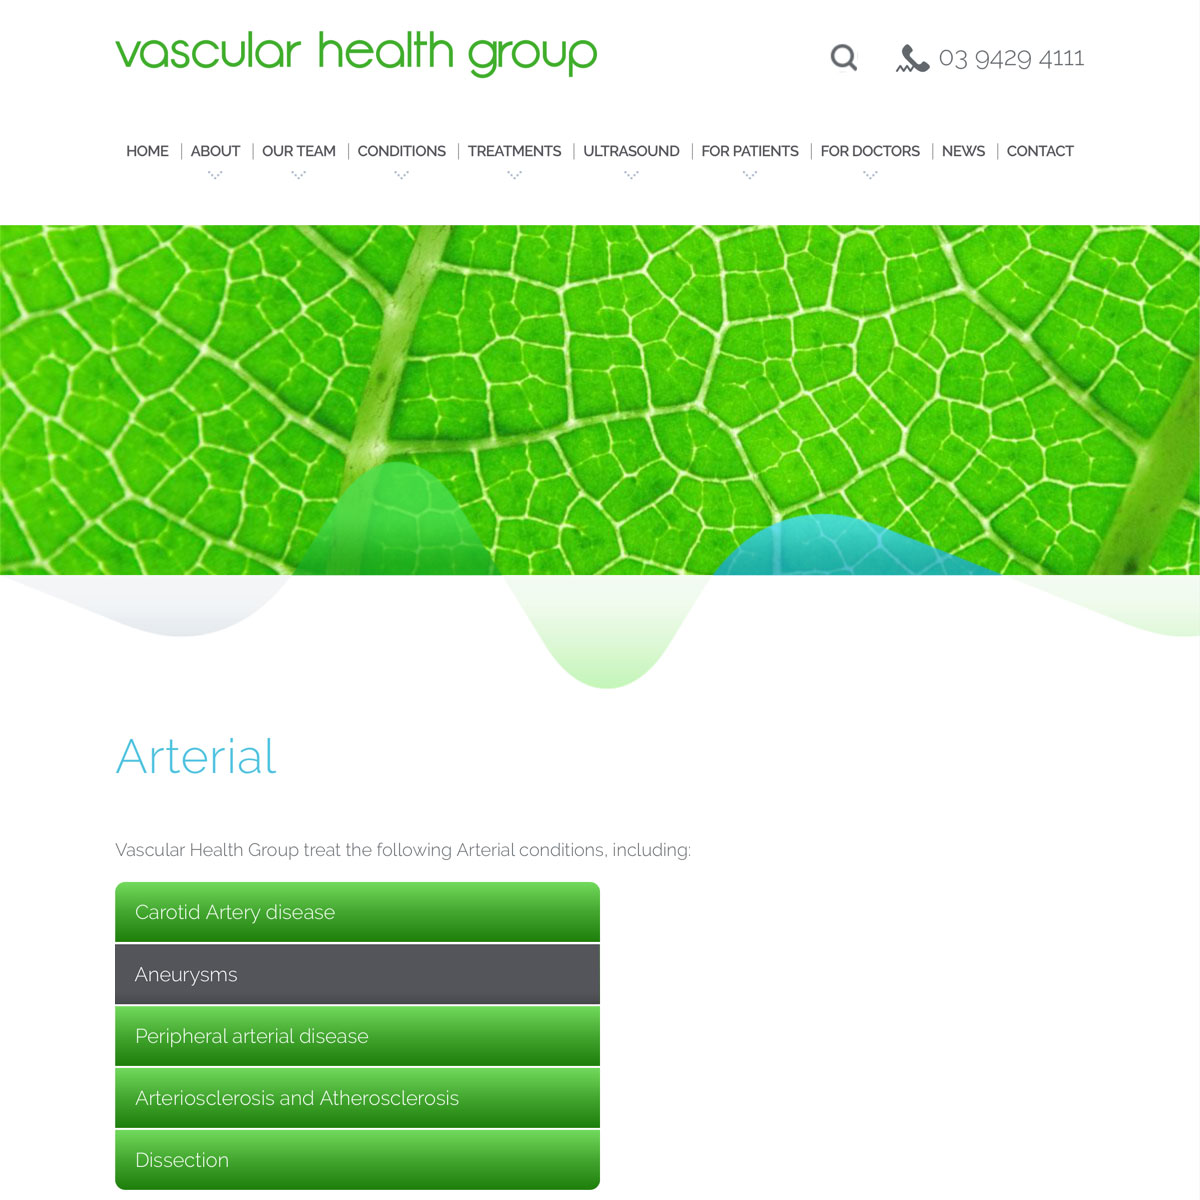 Vascular Health Group - Conditions Index